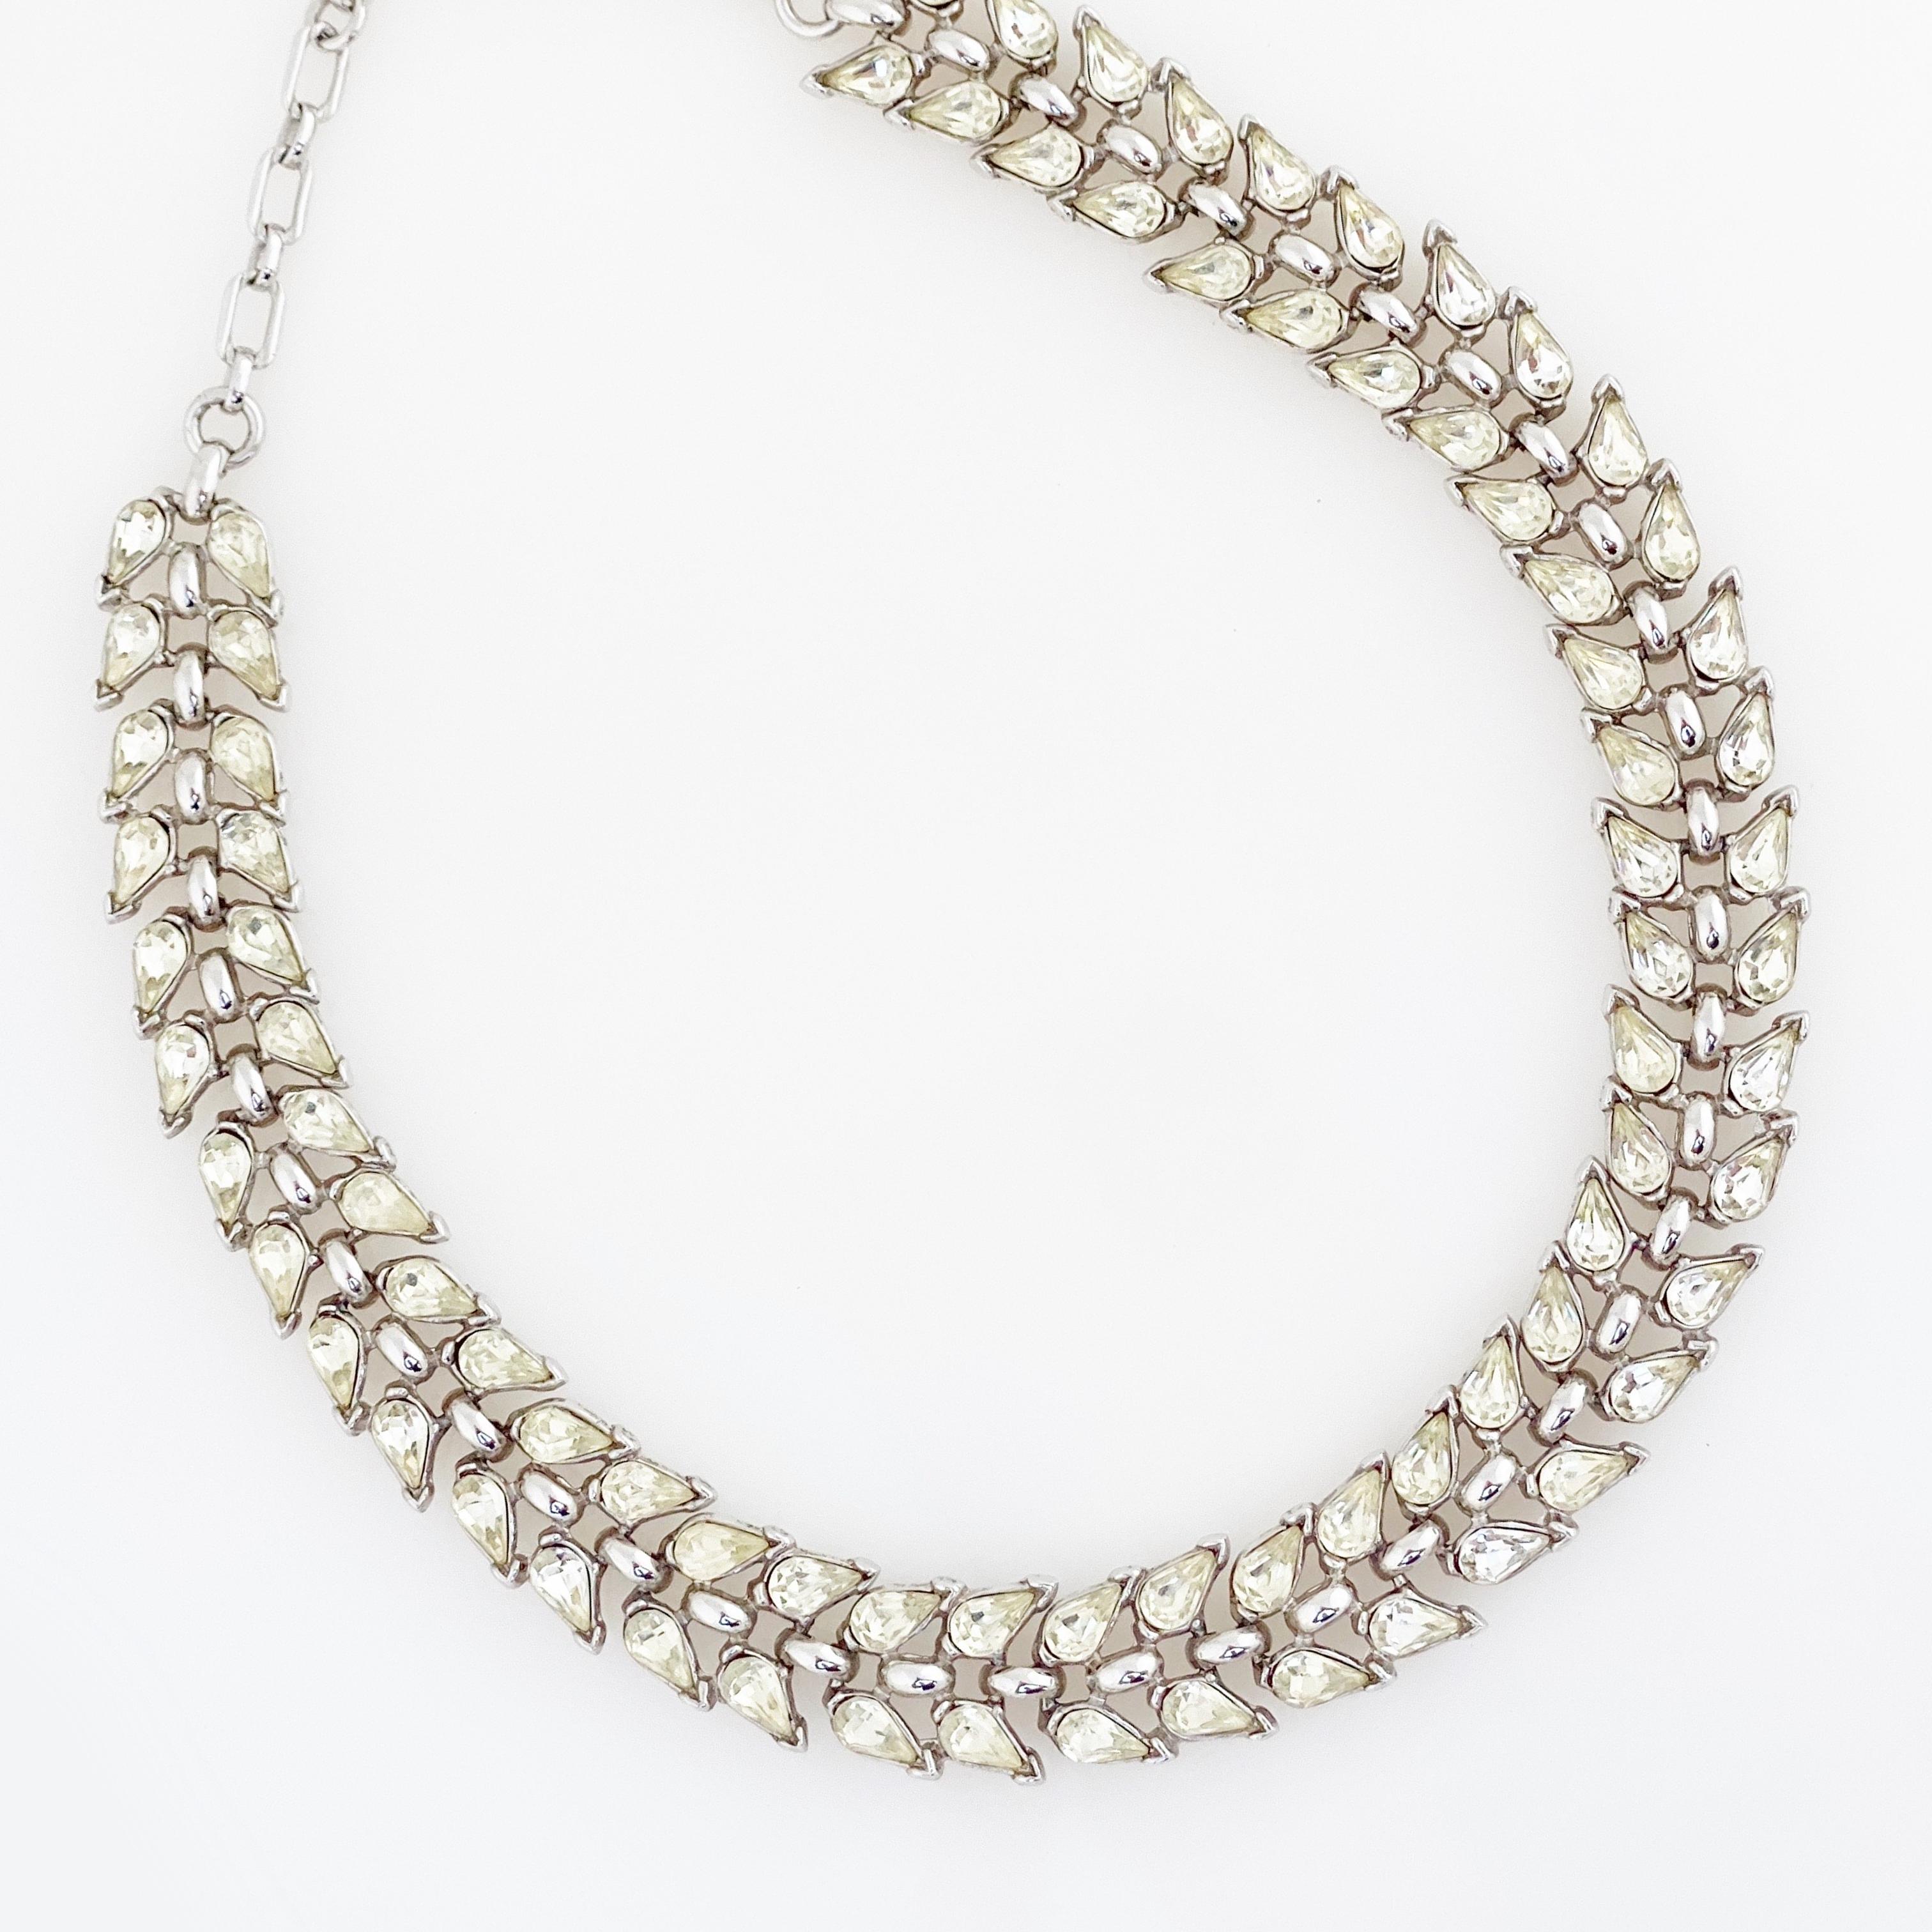 Modern Pear Shaped Crystal Choker Necklace By Crown Trifari, 1950s